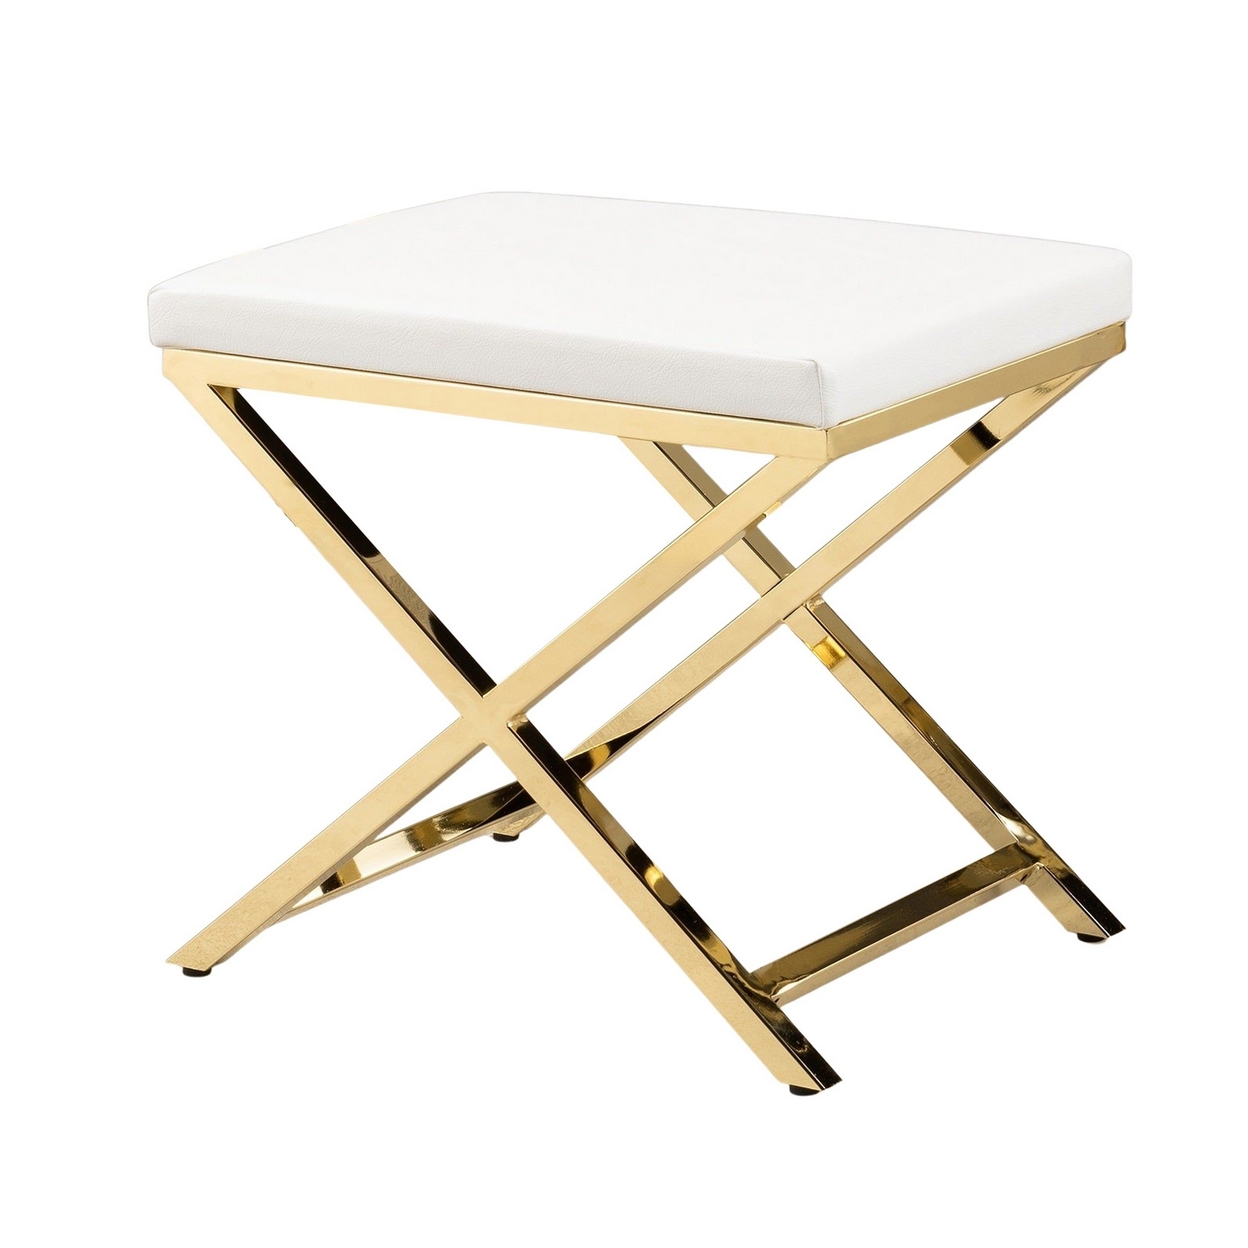 Sumi 18 Inch Stool, Padded Seat, White Faux Leather, Crossed Gold Legs - Saltoro Sherpi